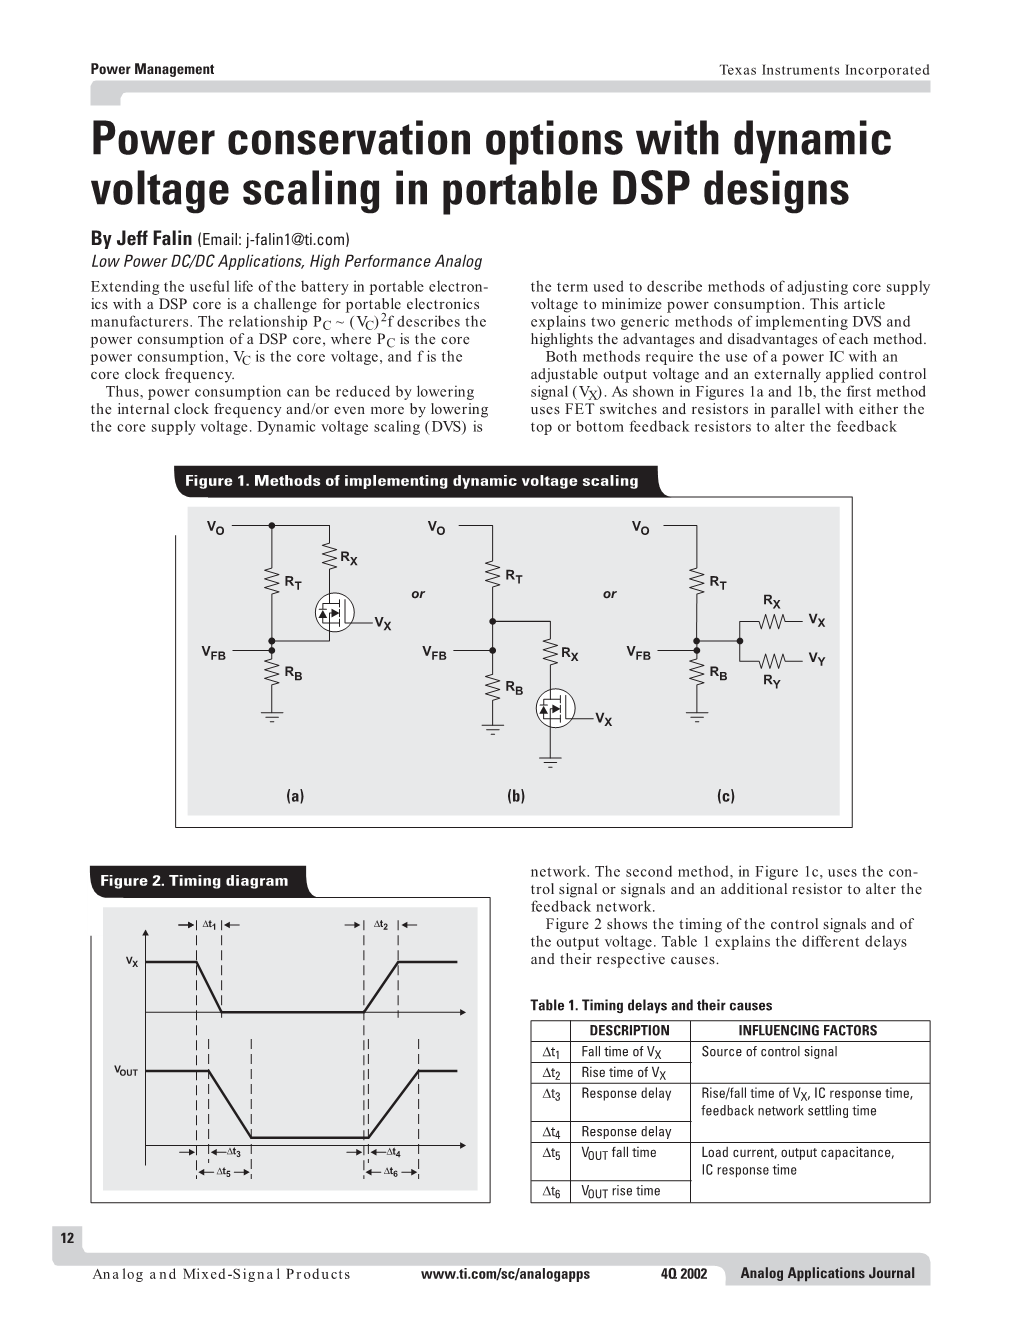 Power Conservation Options with Dynamic Voltage Scaling in Portable